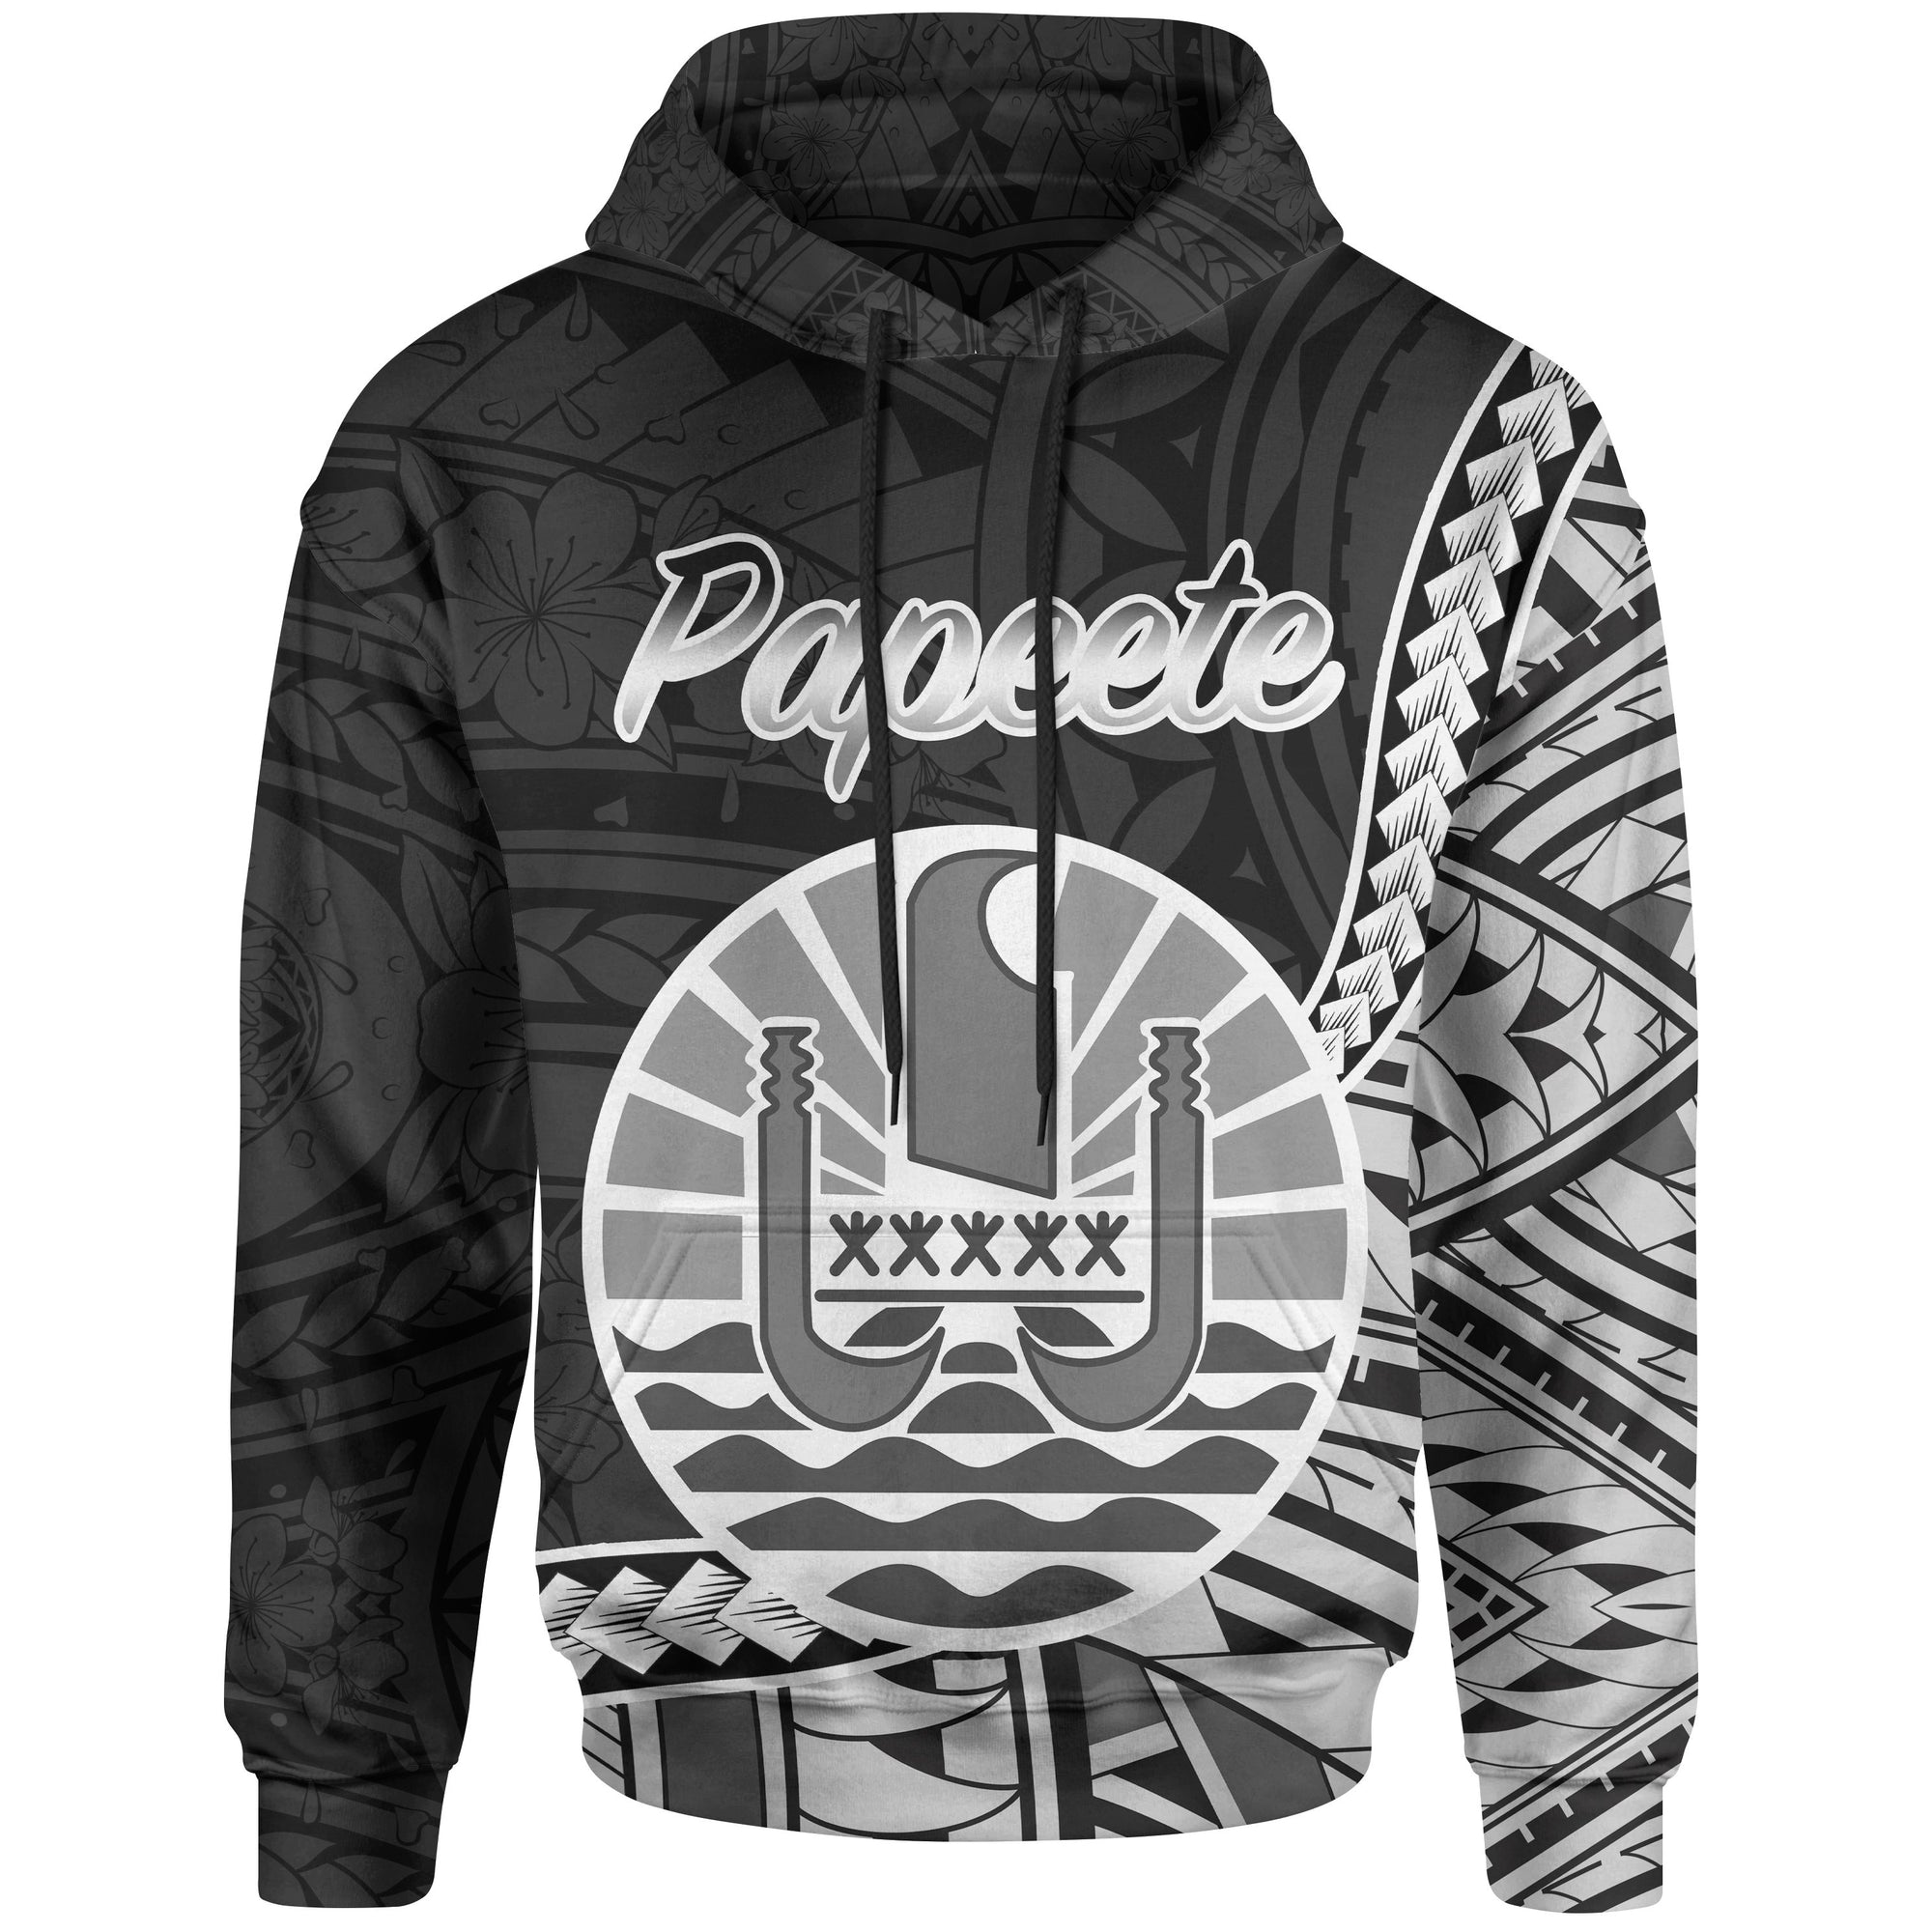 French Polynesia Hoodie Papeete Seal of French Polynesia Polynesian Patterns Unisex Black - Polynesian Pride